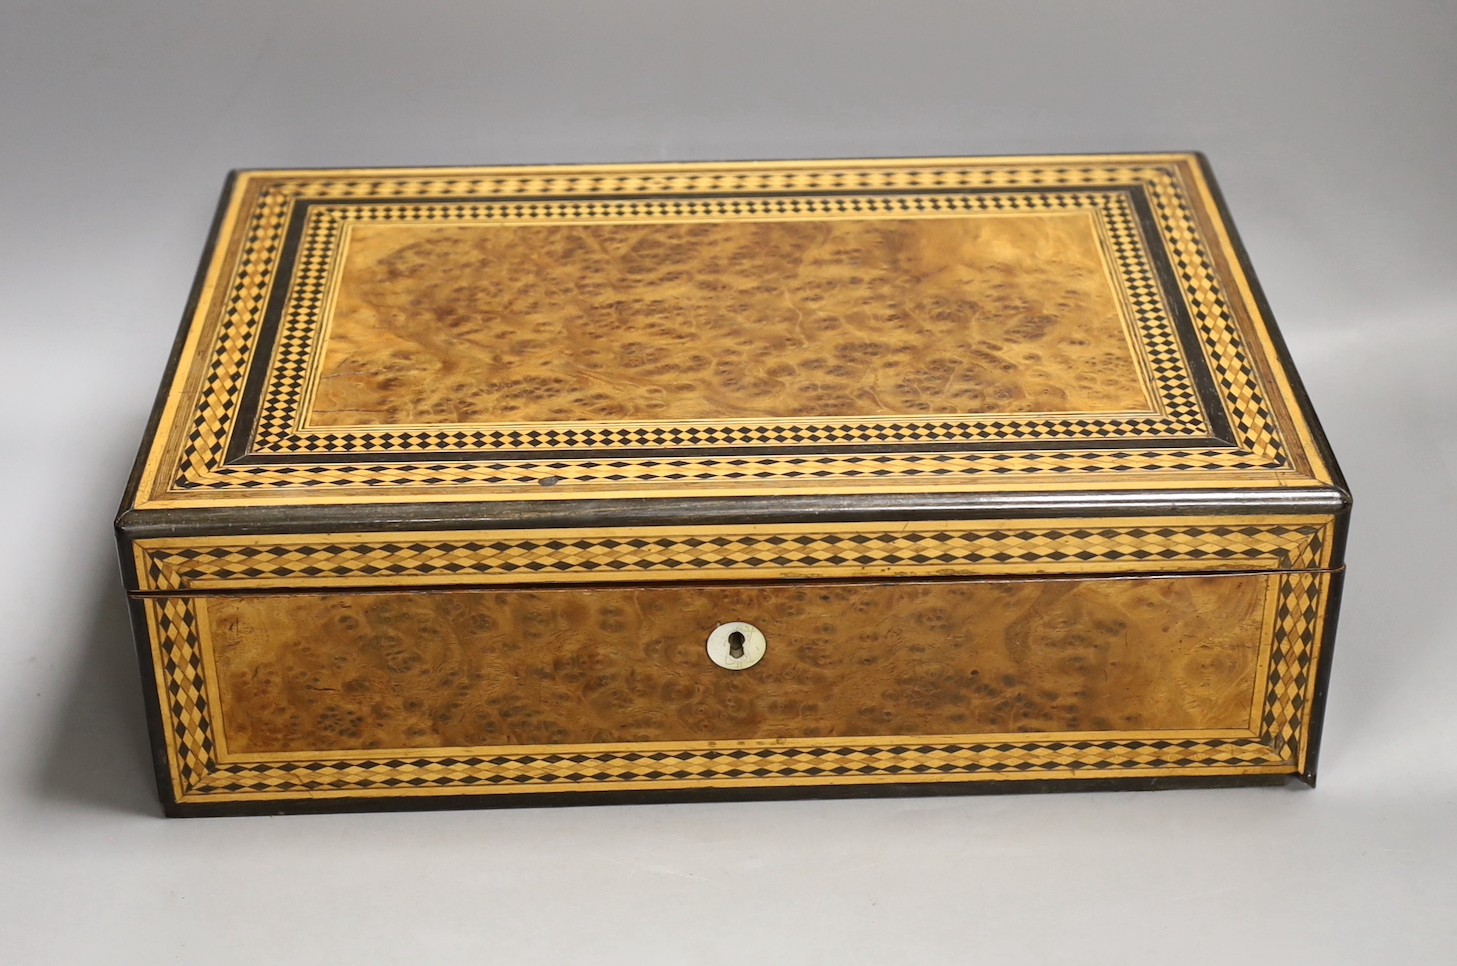 A 19th century walnut and marquetry writing slope - 38cm